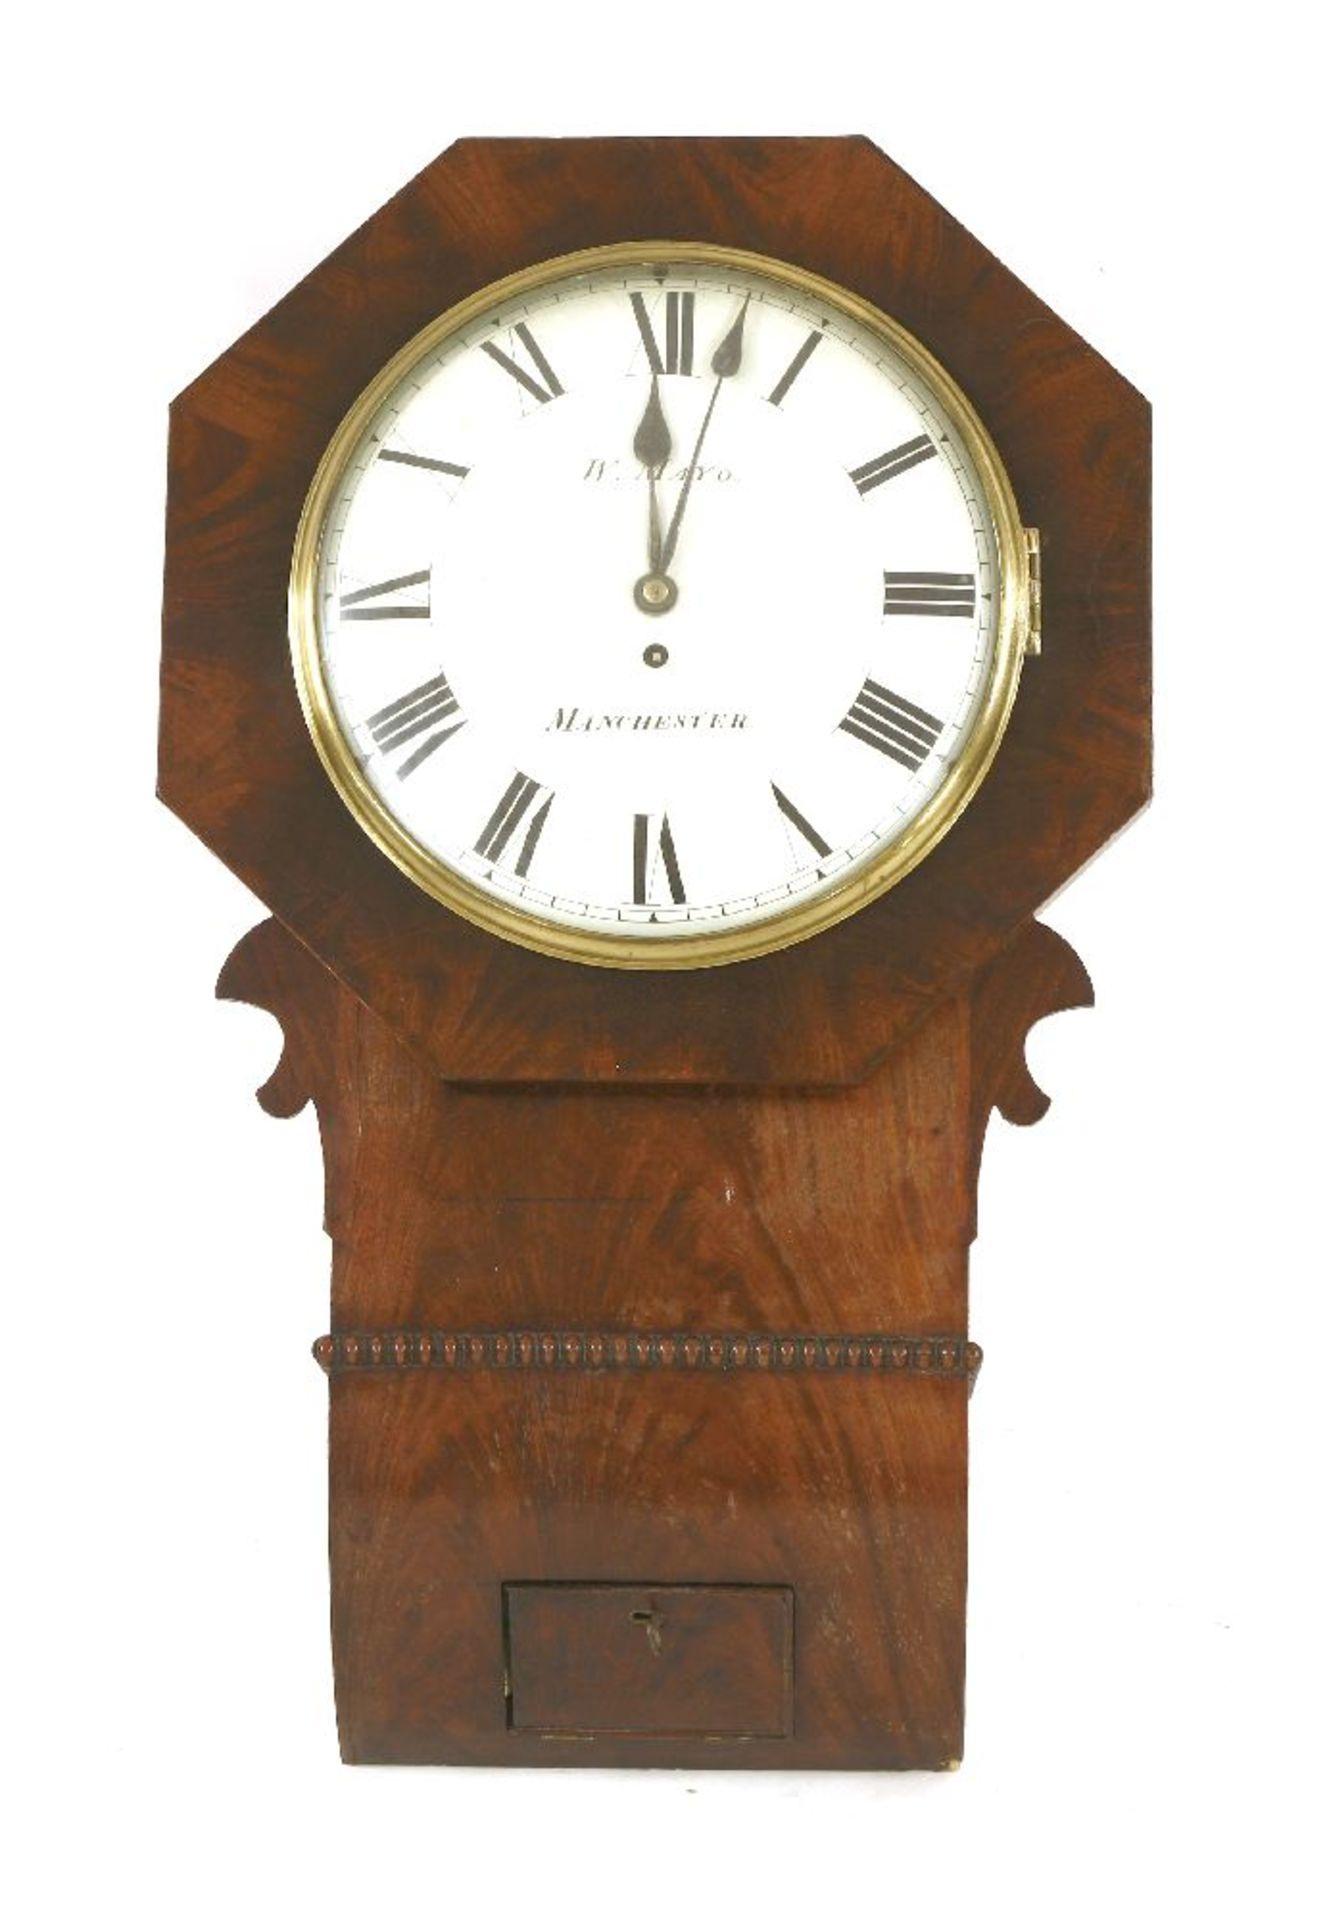 A mahogany drop-dial wall clock,c.1850, by Mayo, Manchester, the white painted dial within an